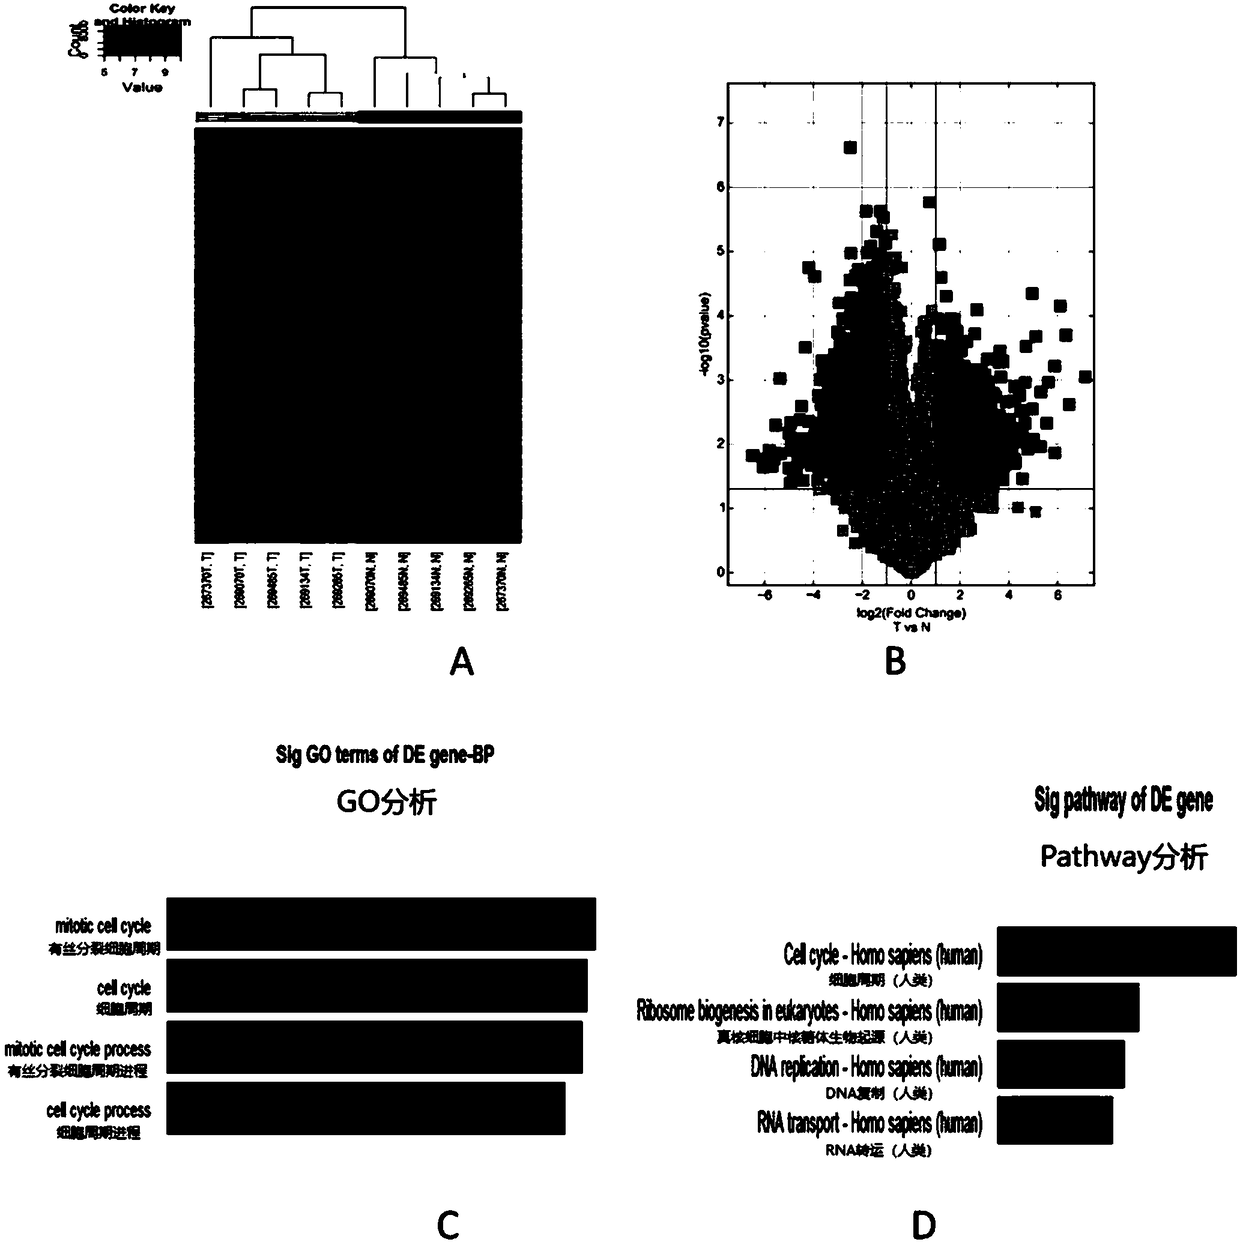 Application of circ-0000423 to preparation or screening of colon cancer drugs